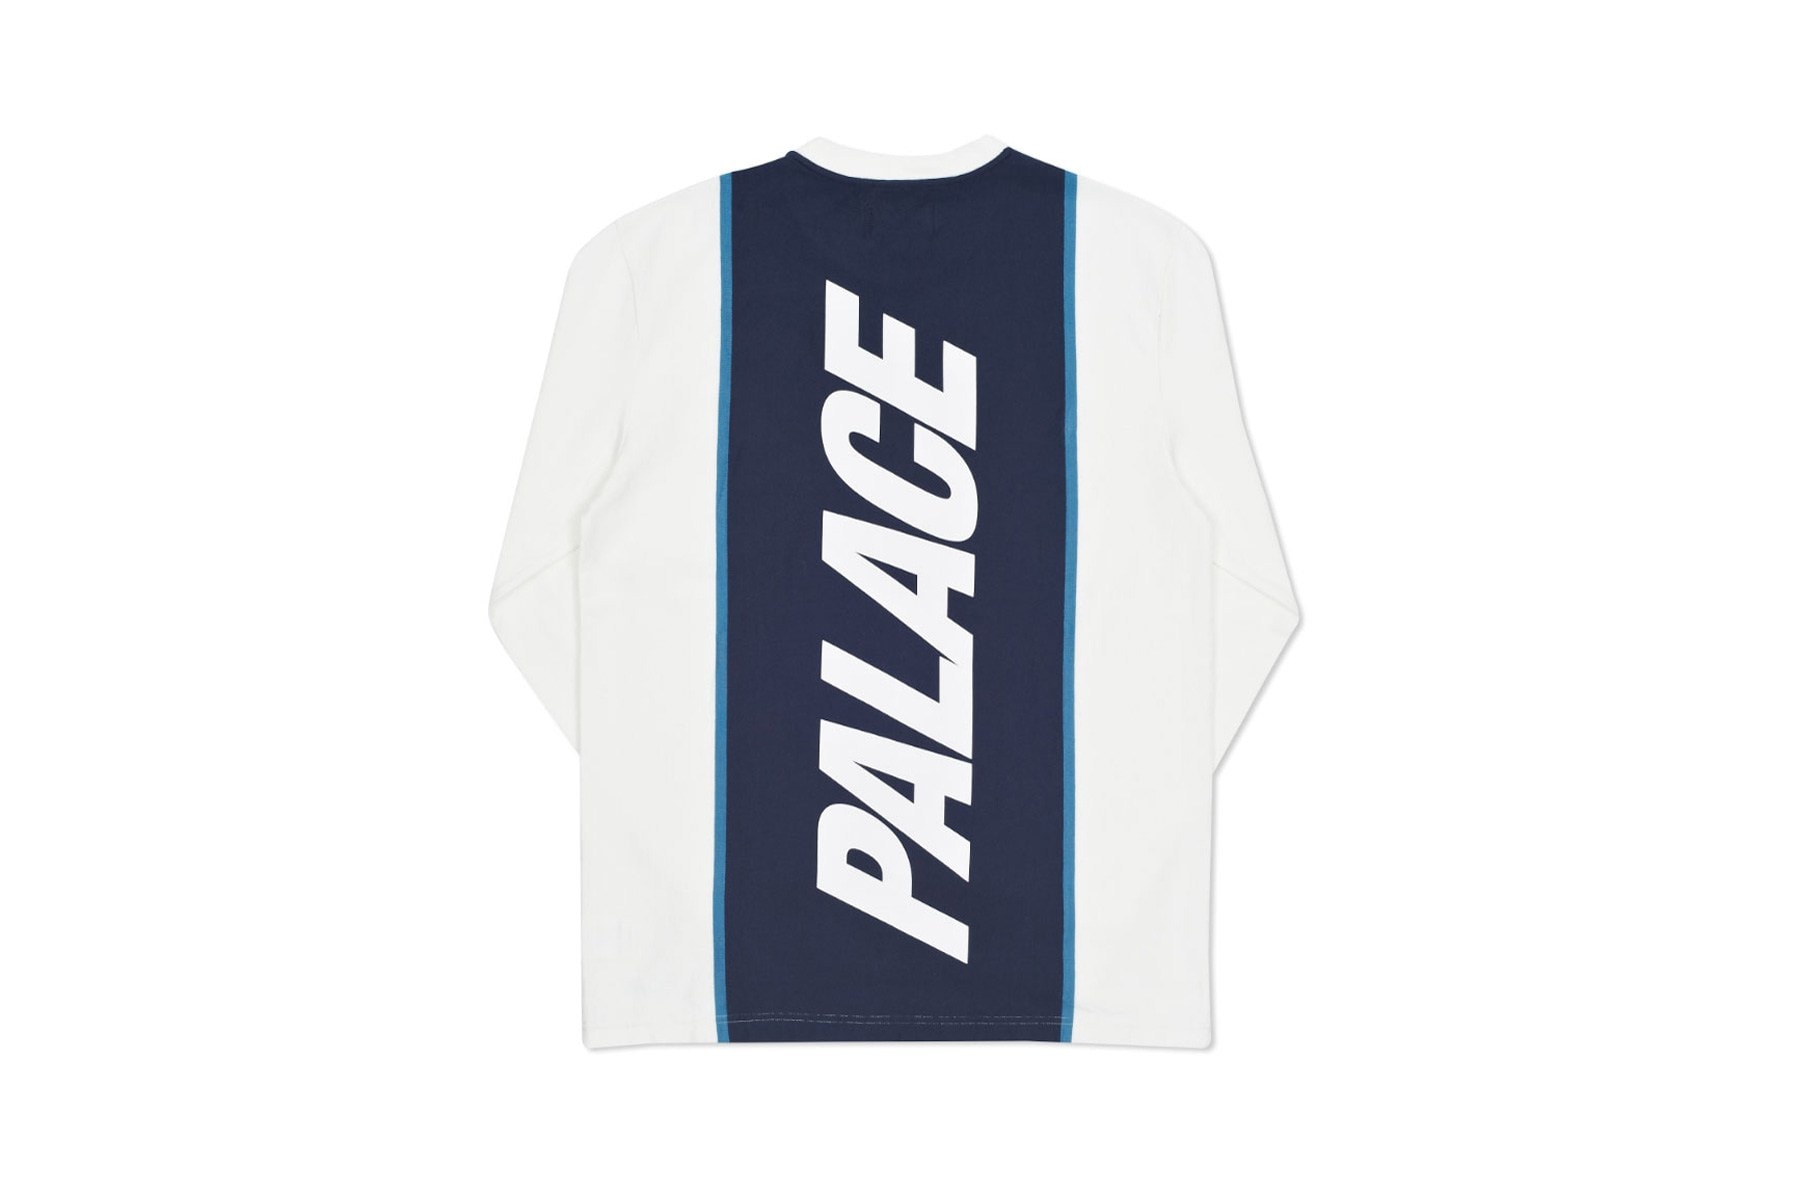 Palace 2016 Fall/Winter Collection